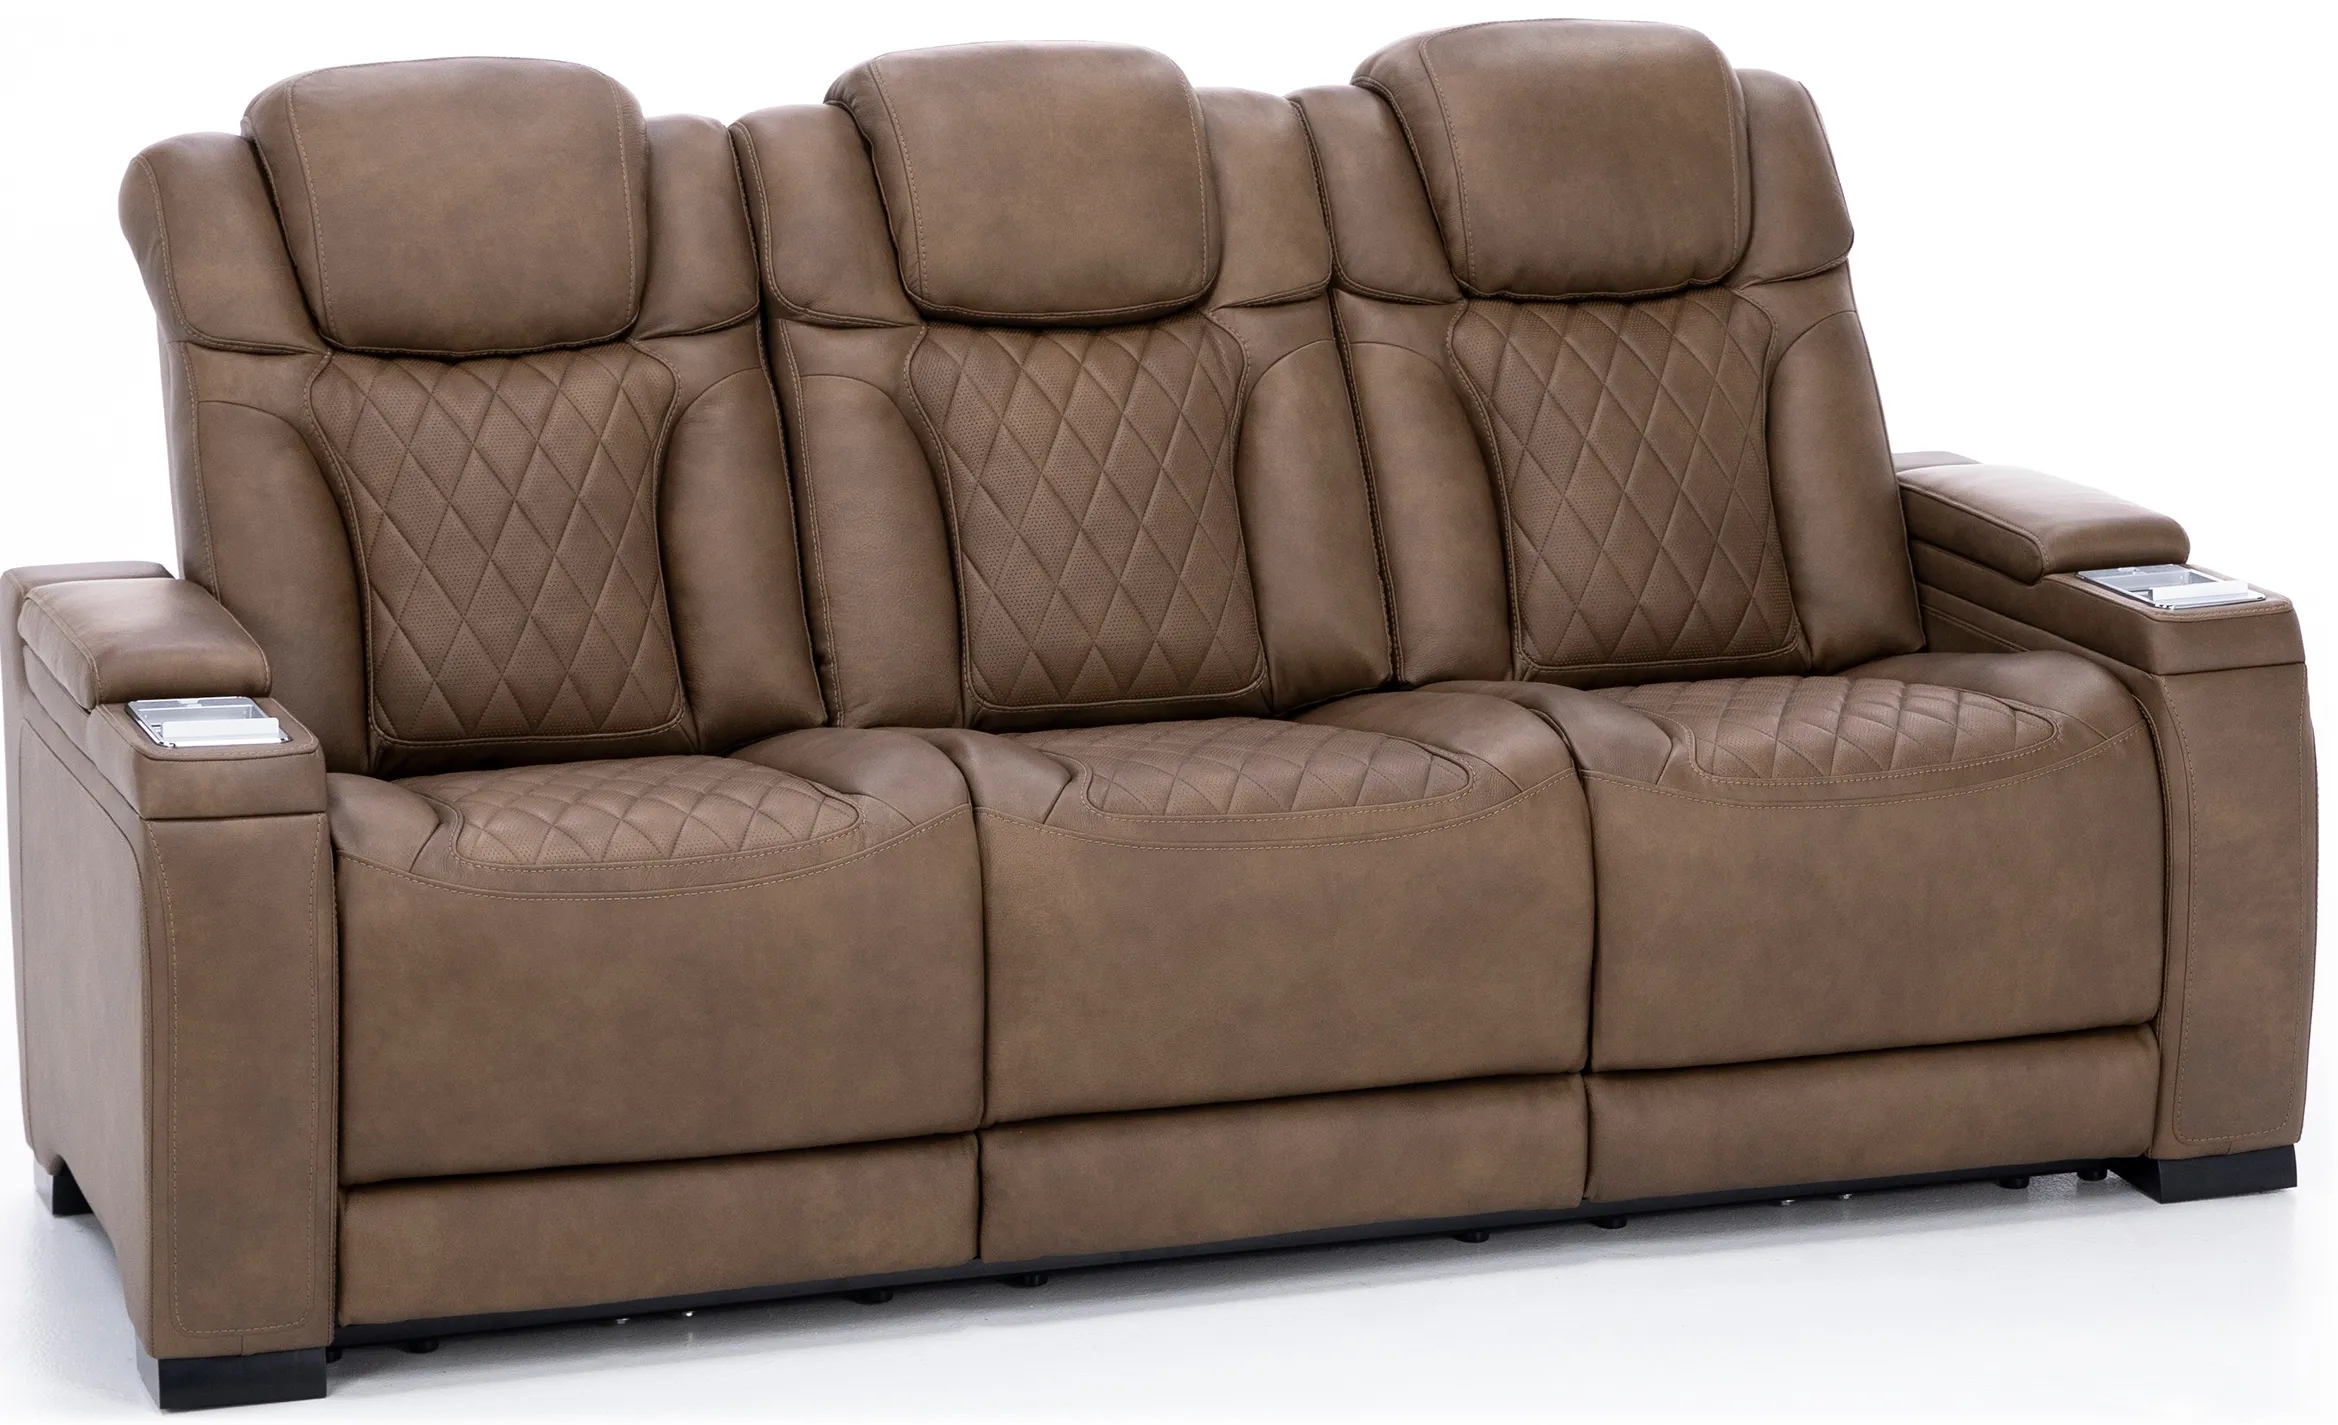 Robin Leather Fully Loaded Reclining Sofa With Drop Down Table in Nutmeg